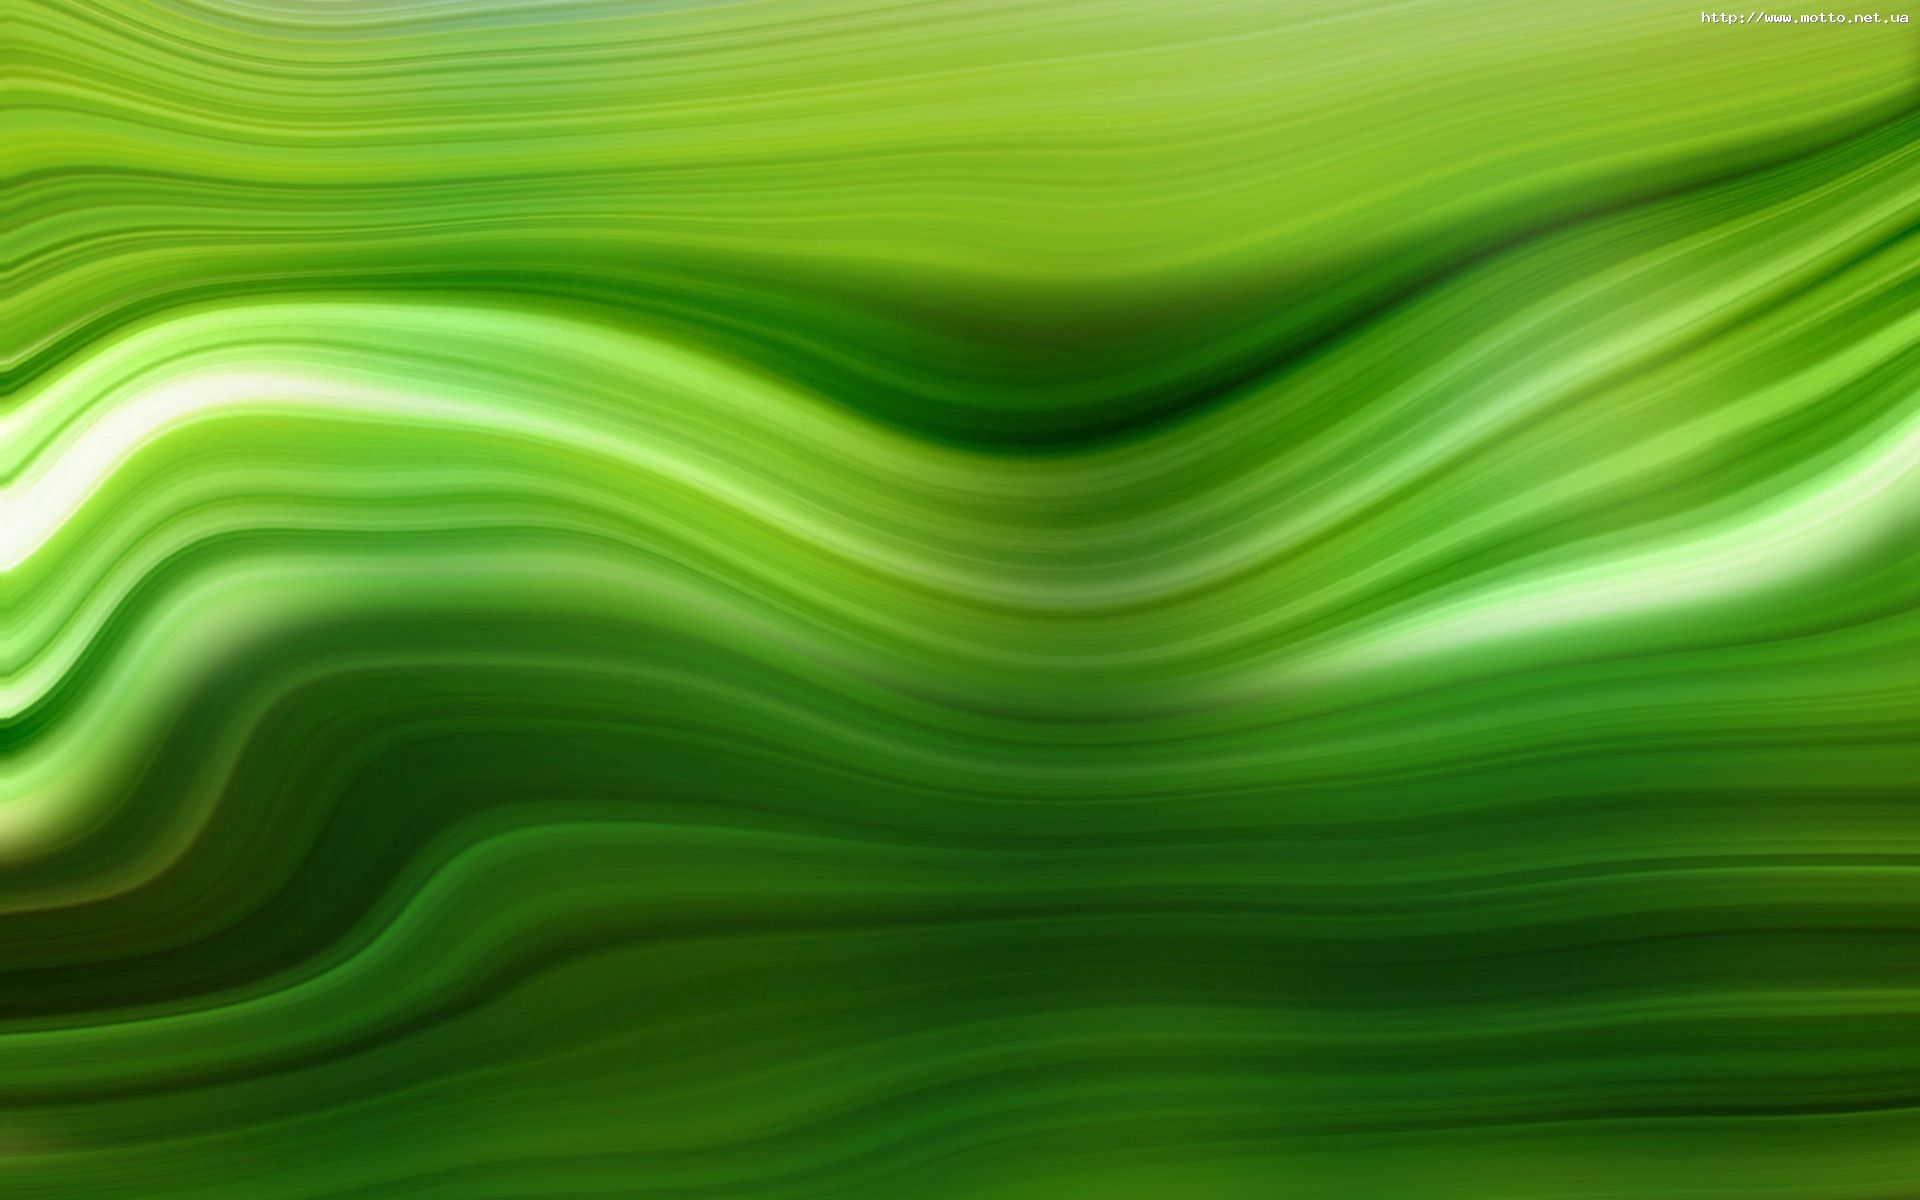 light coloured, abstract, green, light, lines, form, wavy